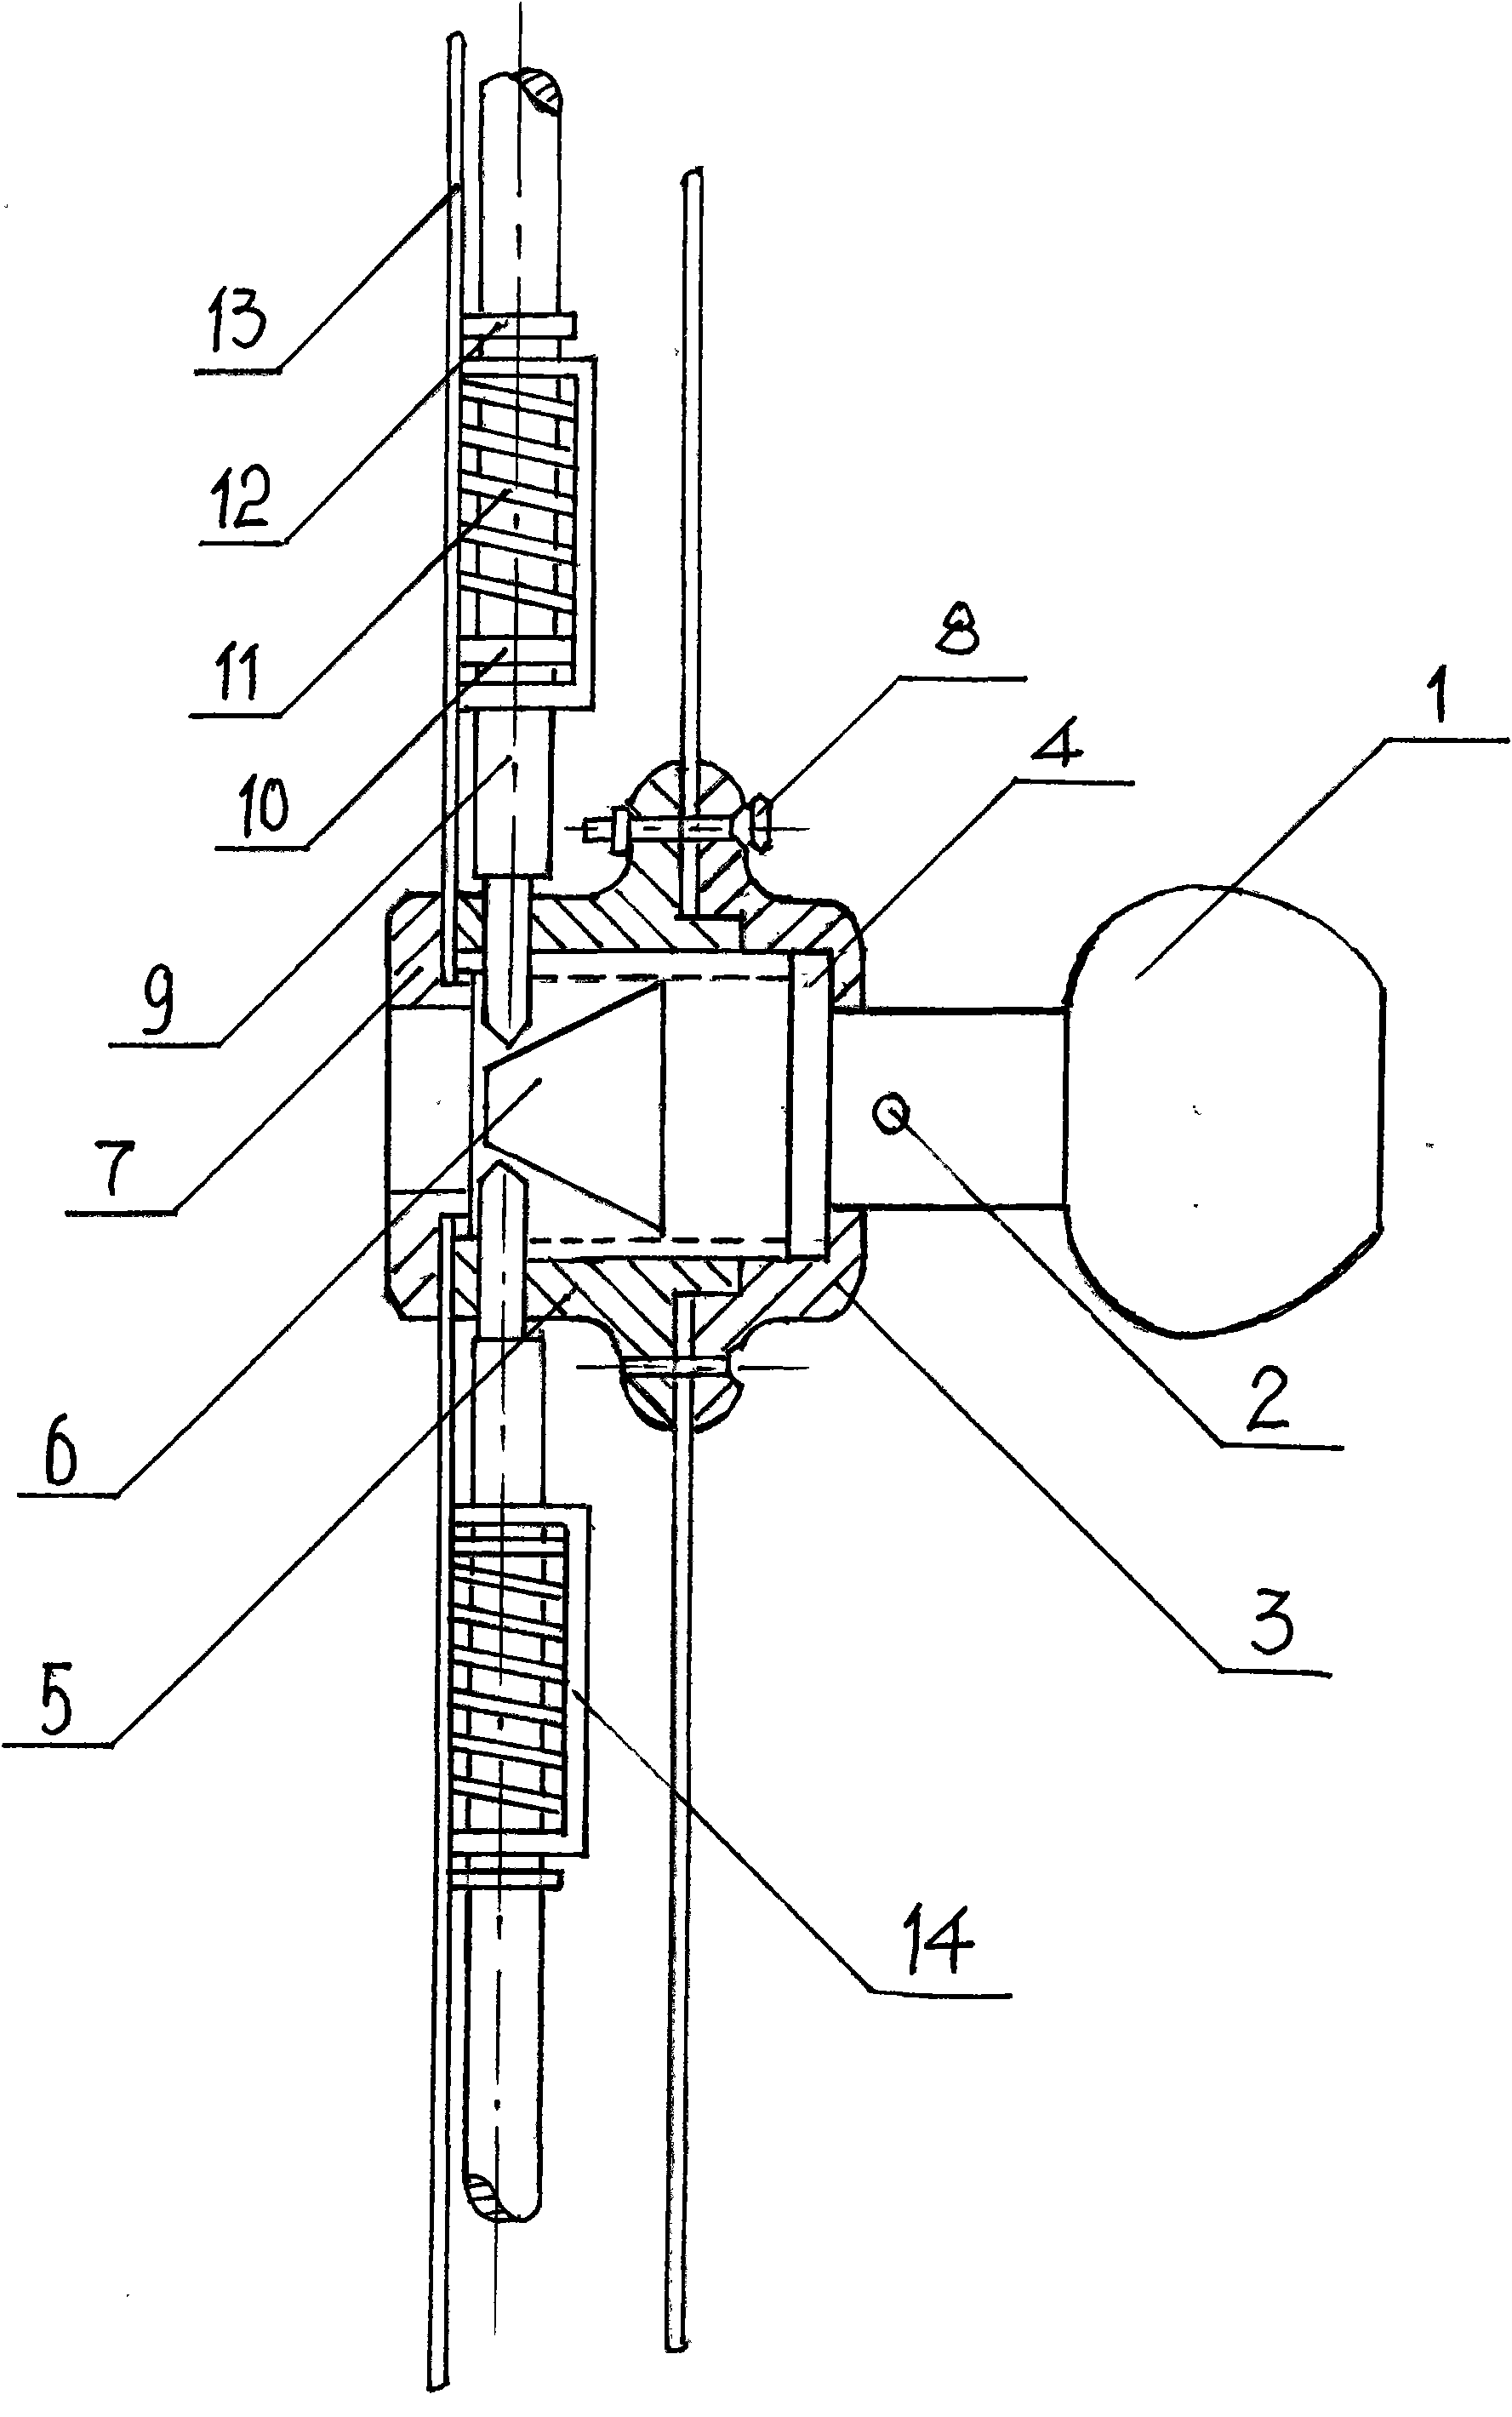 Spinning protective door locking device